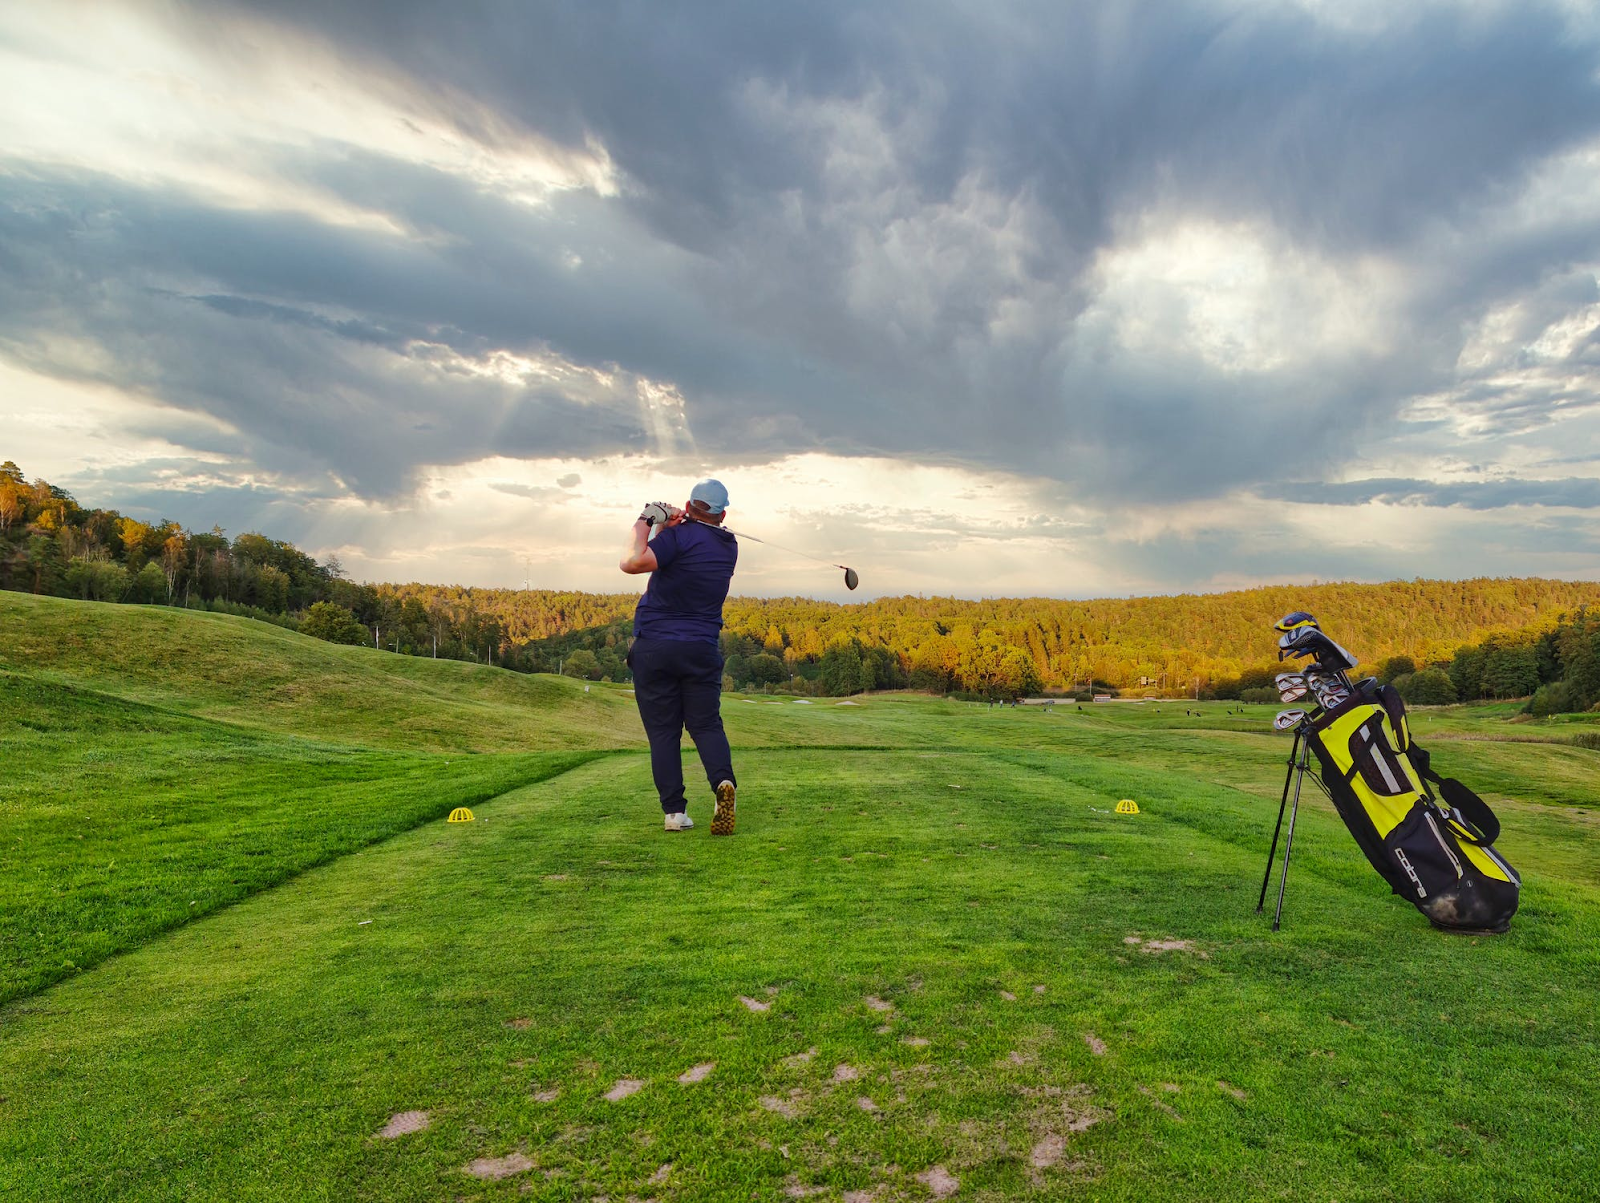 Golf Photo by Martin Magnemyr from Pexels